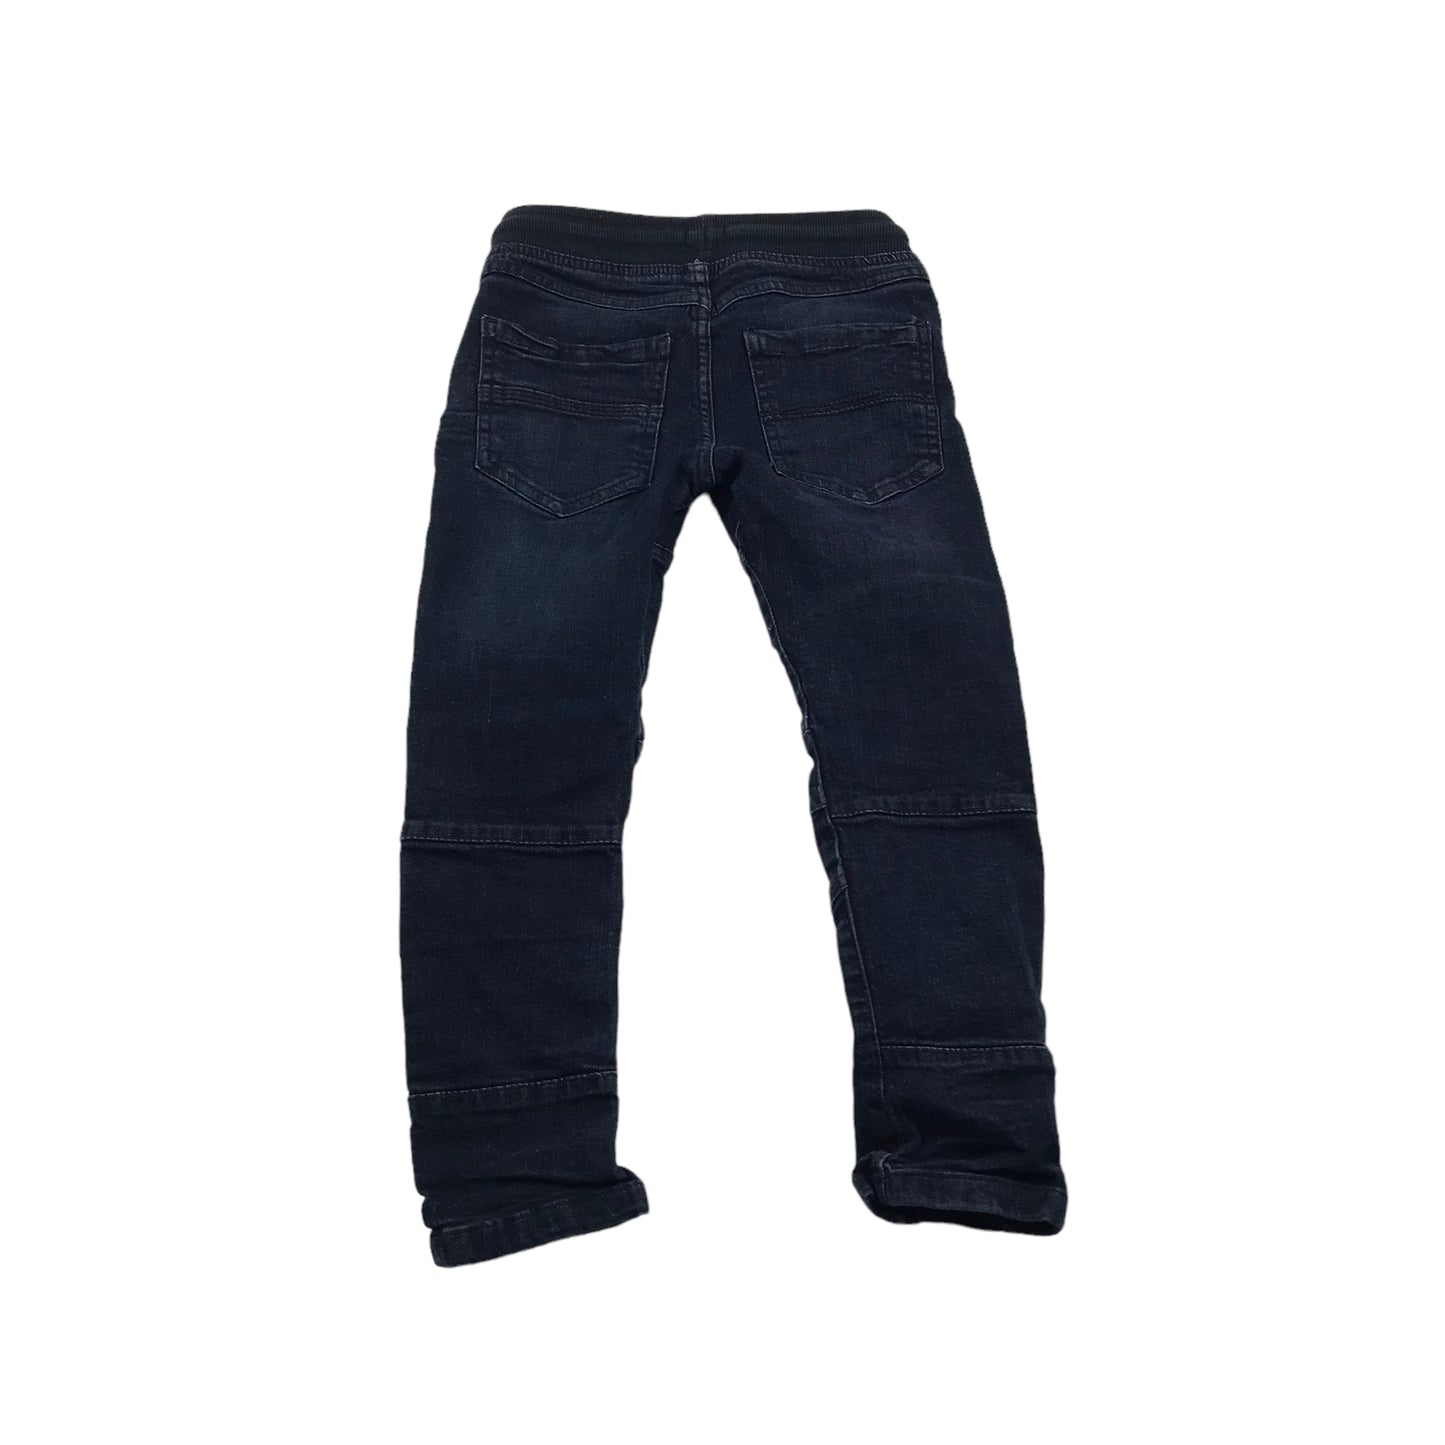 F&F Navy Denim Style Trousers Age 6